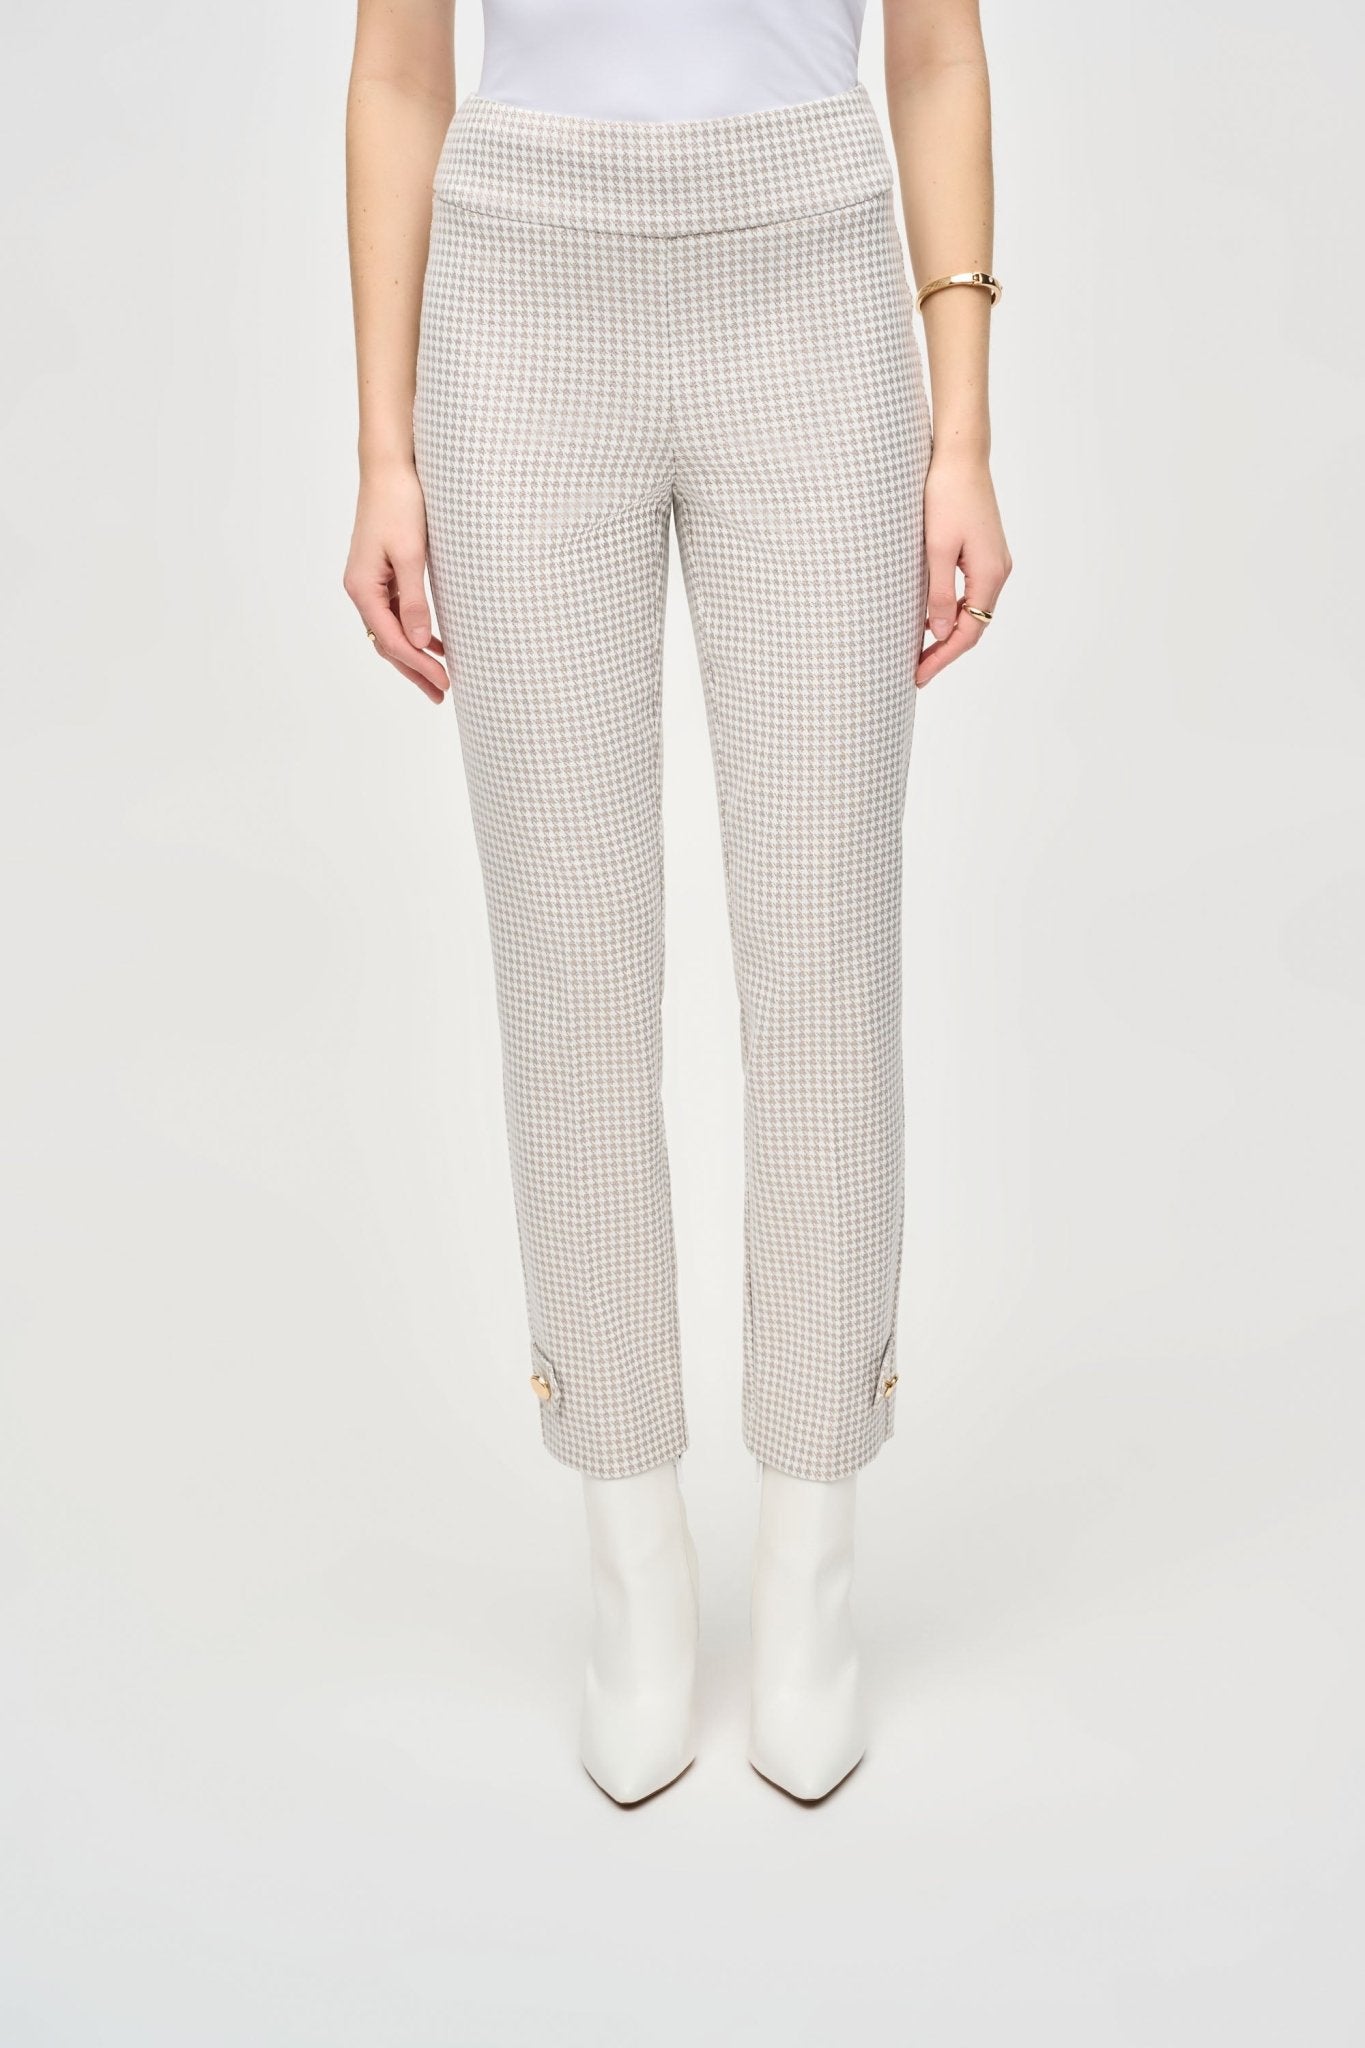 Shop Houndstooth Jacquard Slim Fit Pants Style 243180 | Beige/Off-White - Joseph Ribkoff